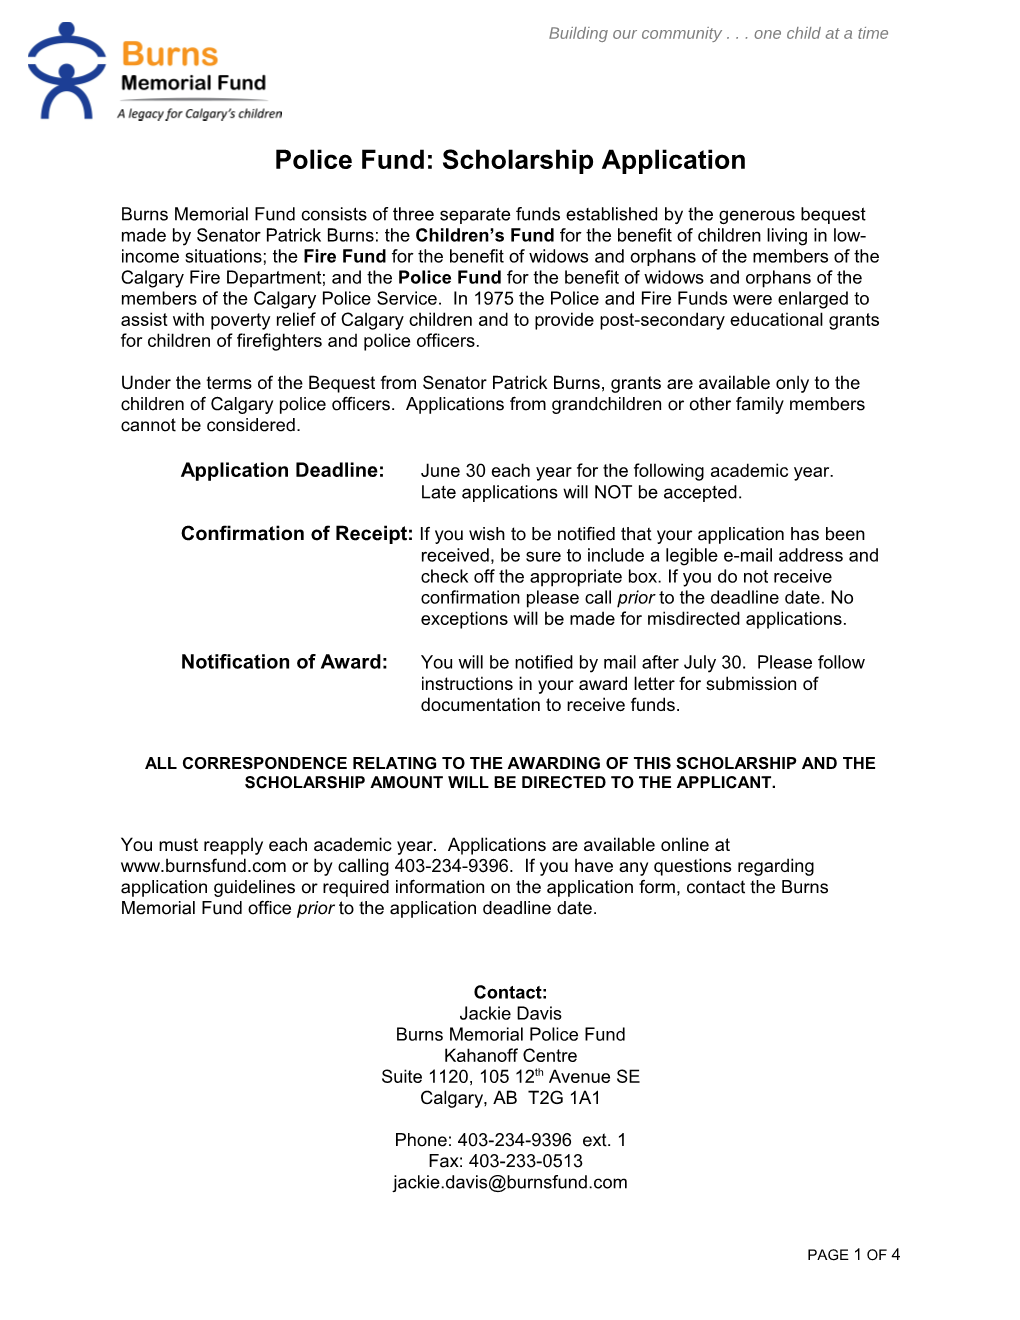 Police Fund: Scholarship Application